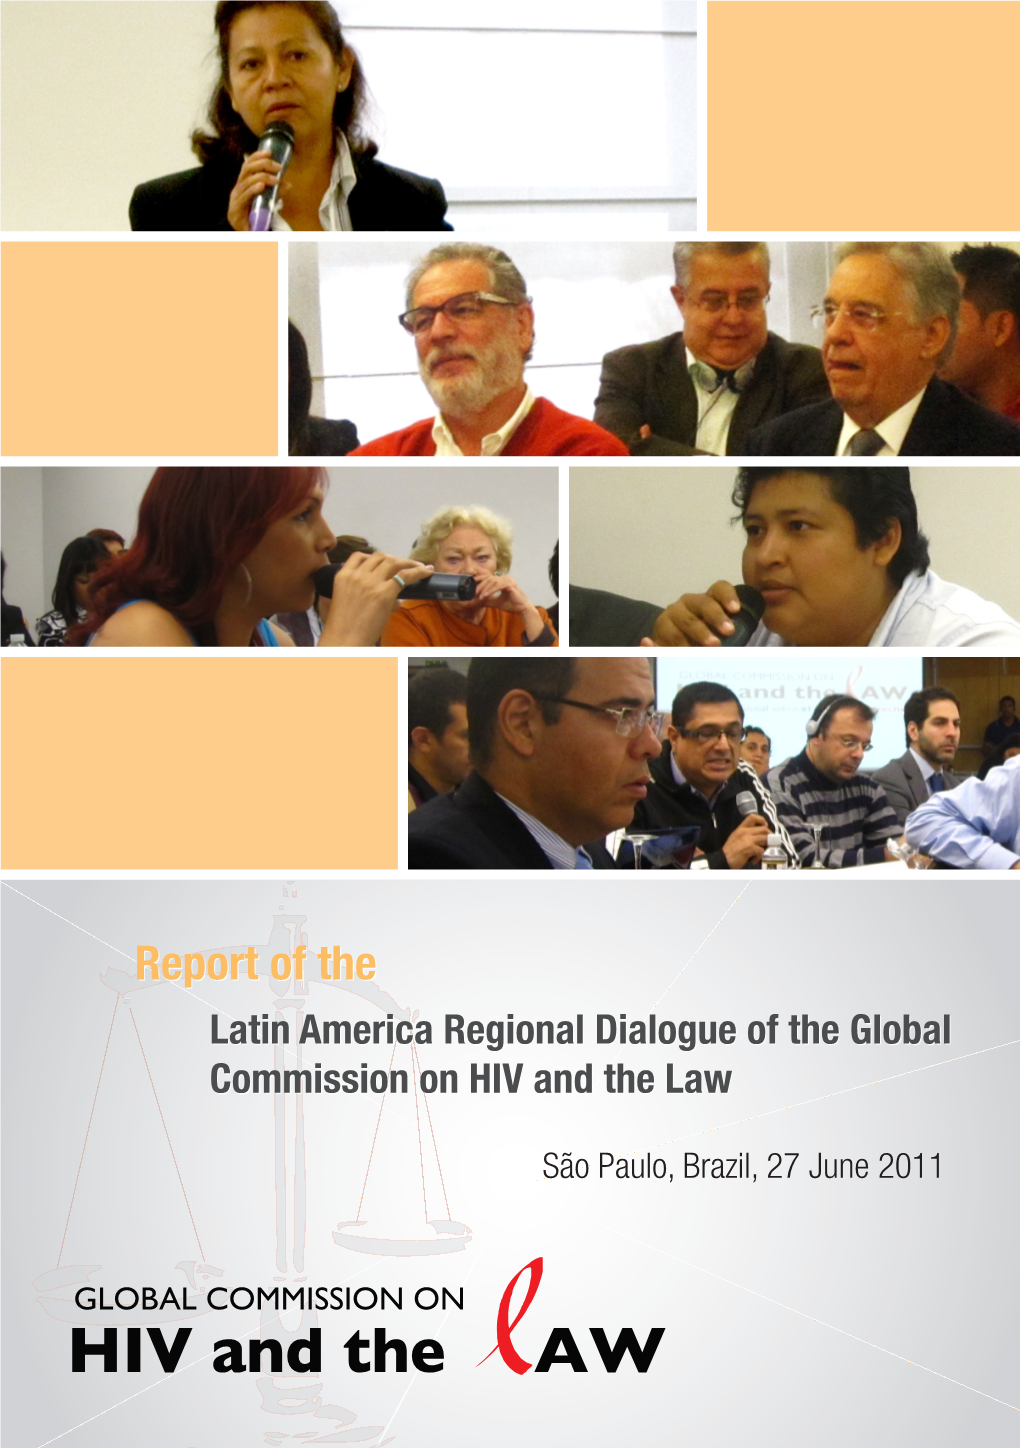 Report of the Latin America Regional Dialogue of the Global Commission on HIV and the Law